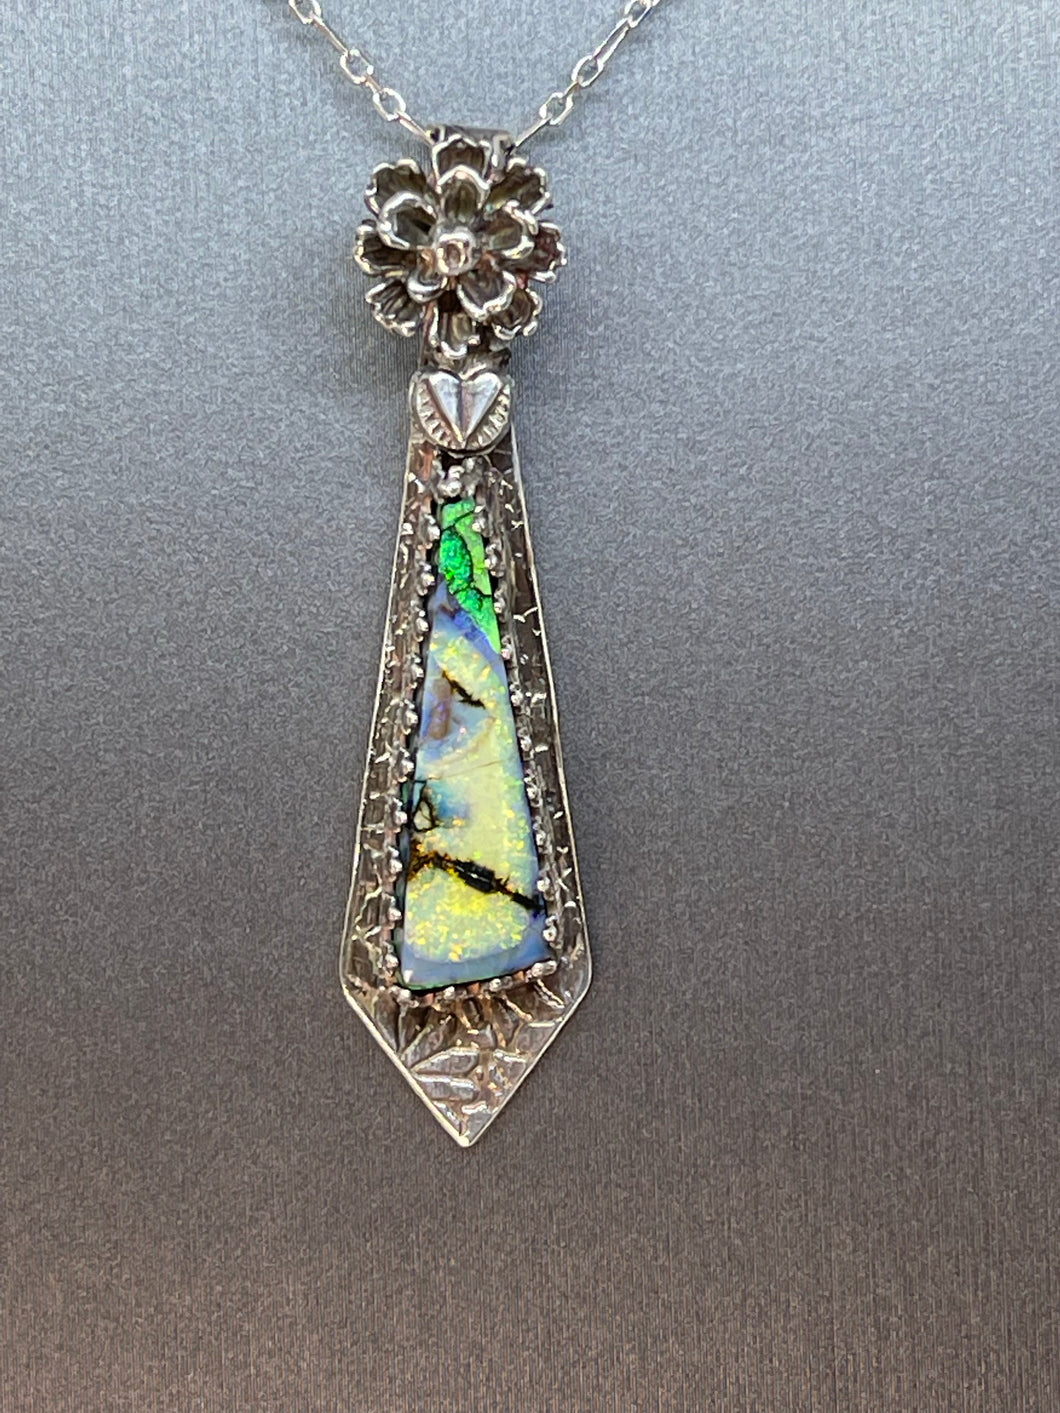 Fine Silver Pendant Features Stunning Sterling Opal